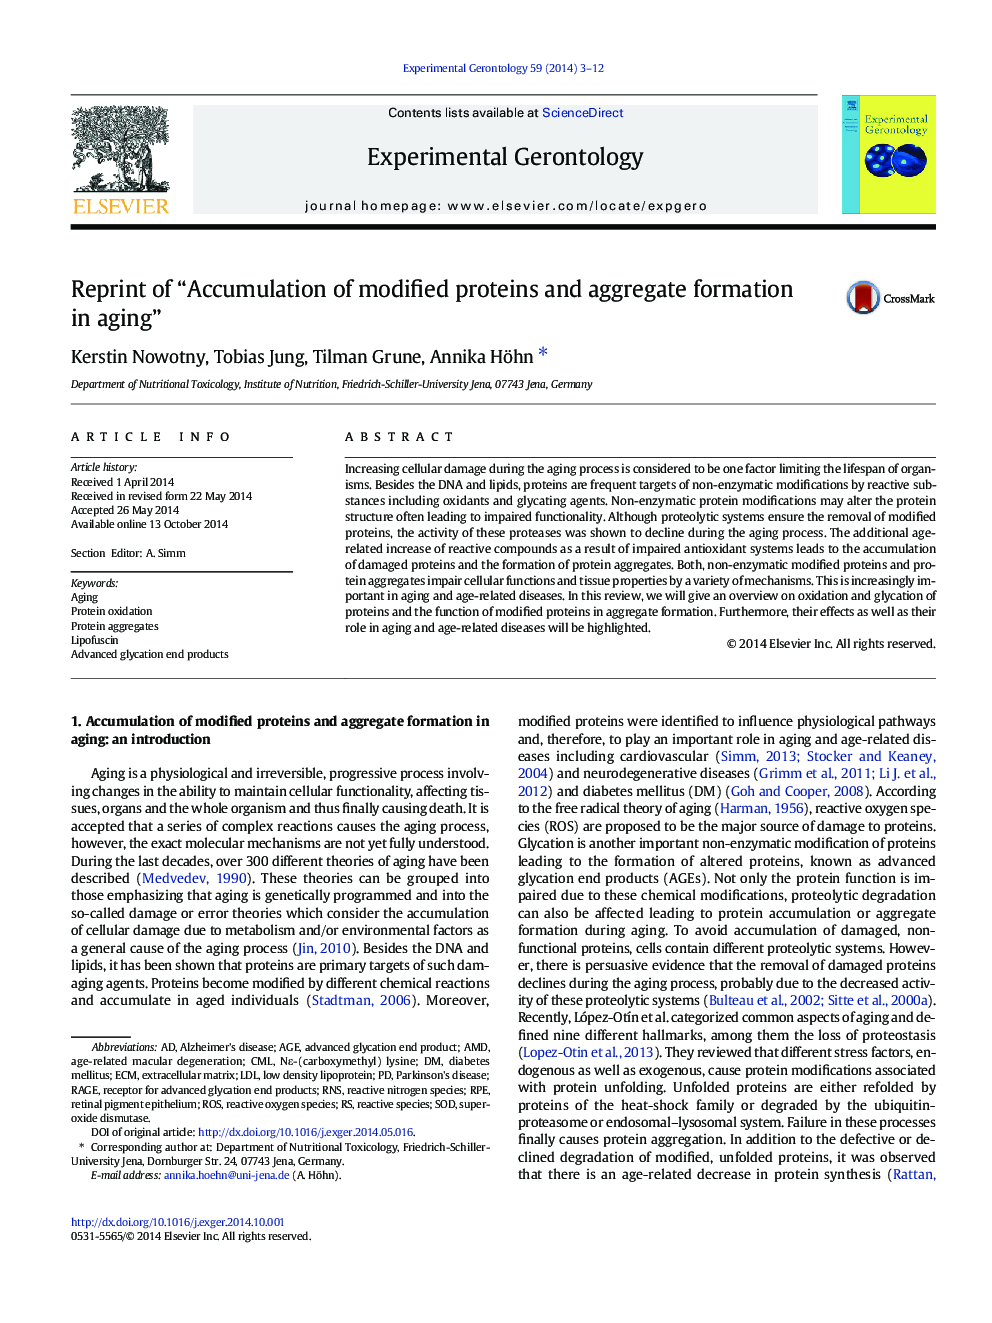 Reprint of “Accumulation of modified proteins and aggregate formation in aging”